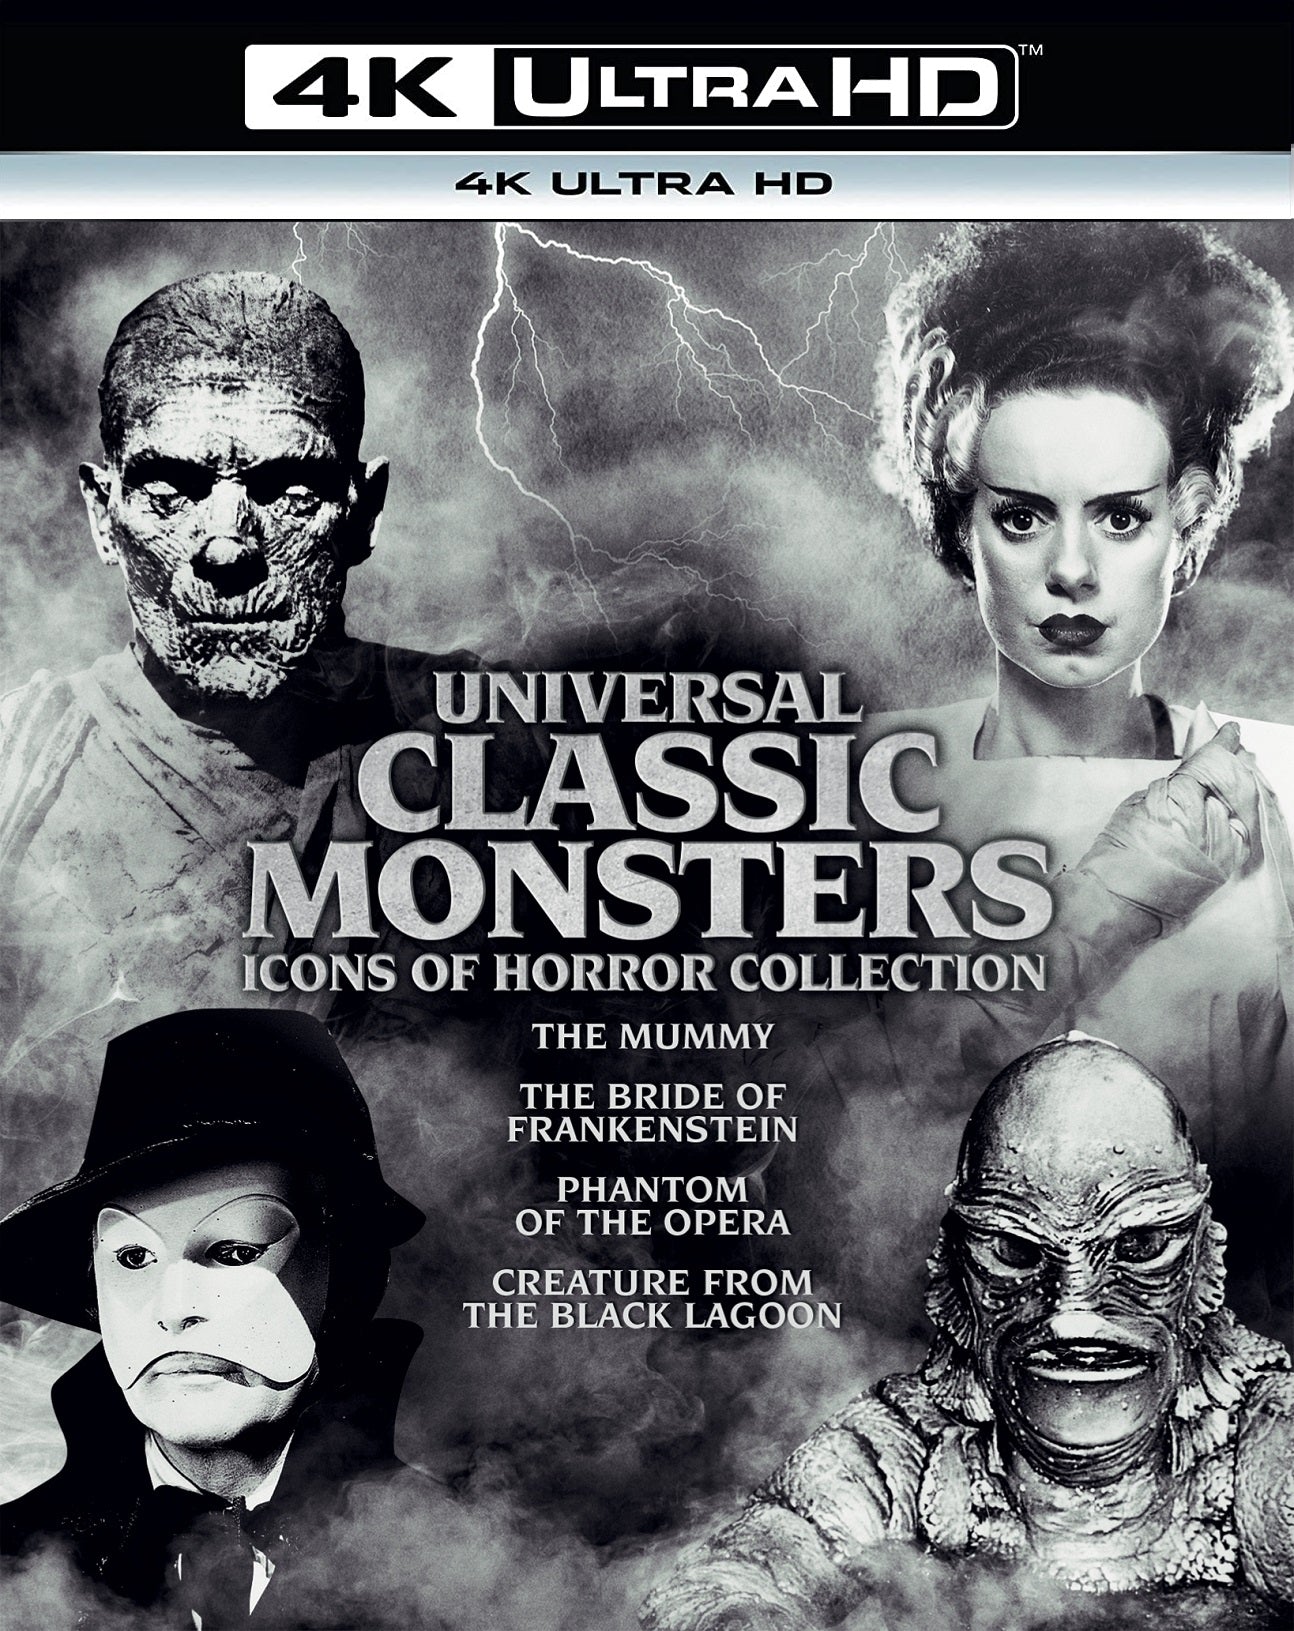 Universal Classic Monsters: Icons of Horror Collection vol.2 (4K Ultra HD)